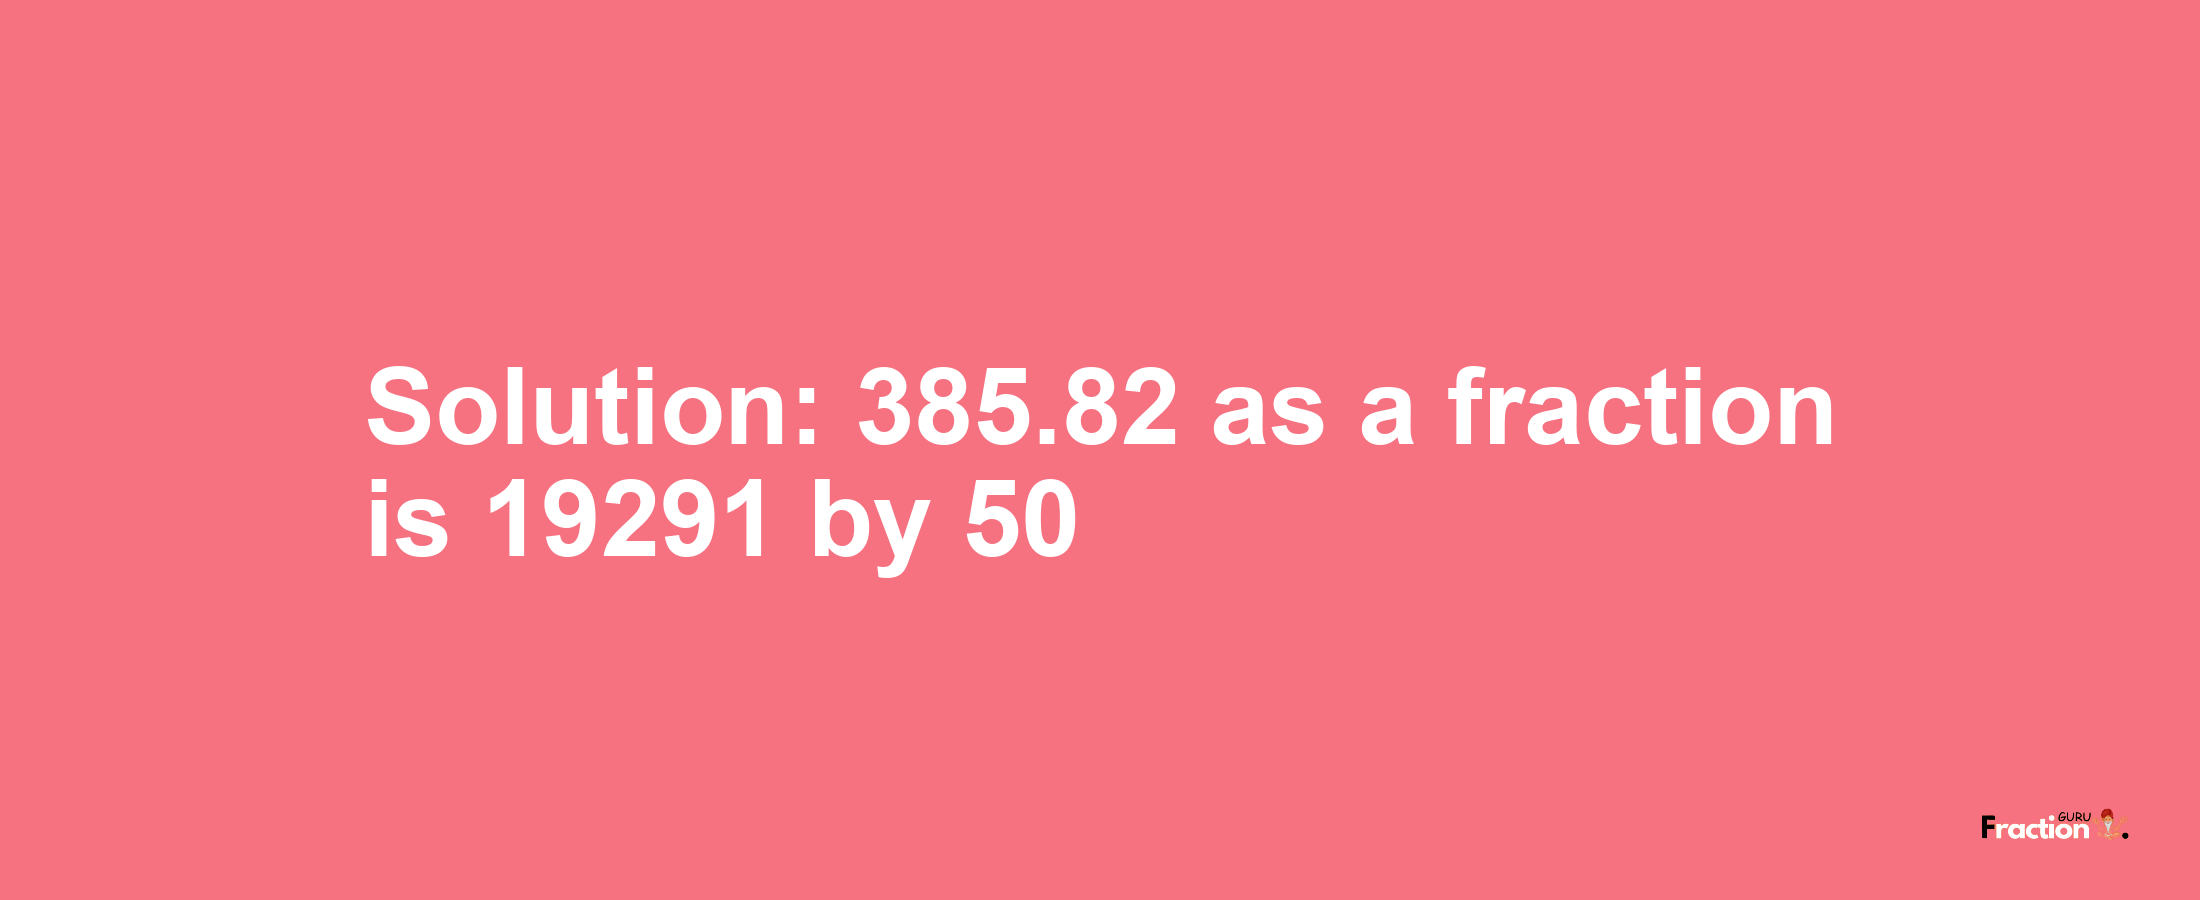 Solution:385.82 as a fraction is 19291/50